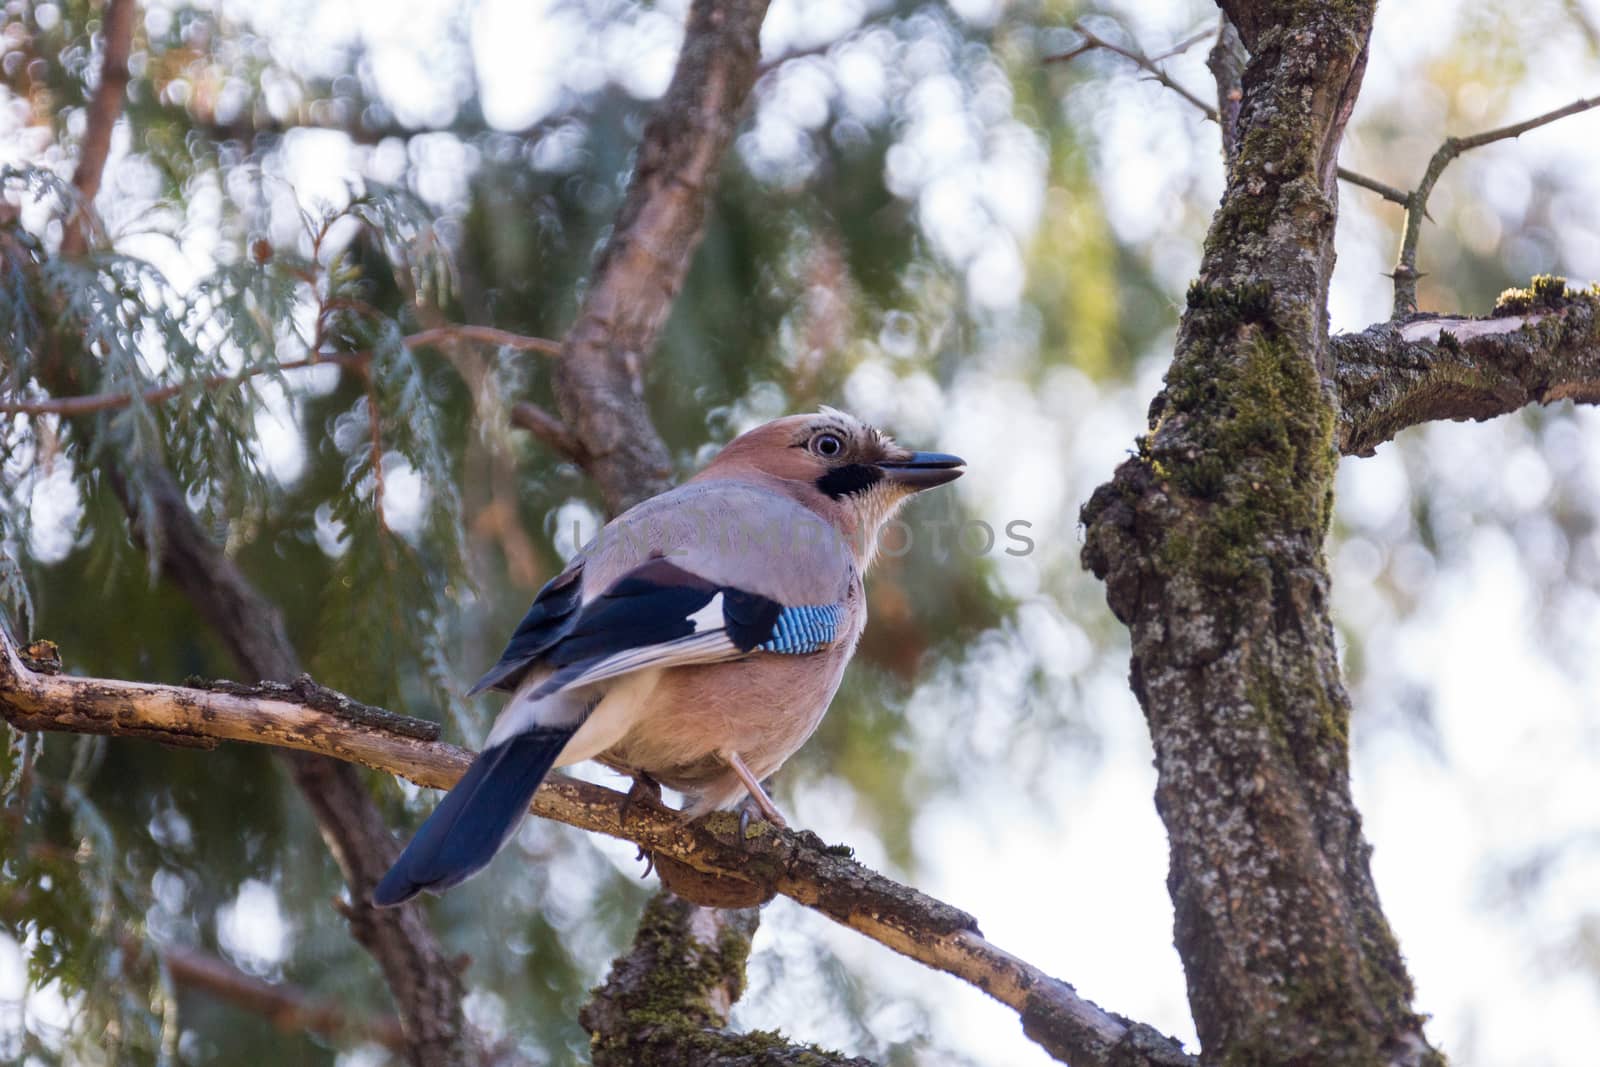 The photo shows jay on a branch